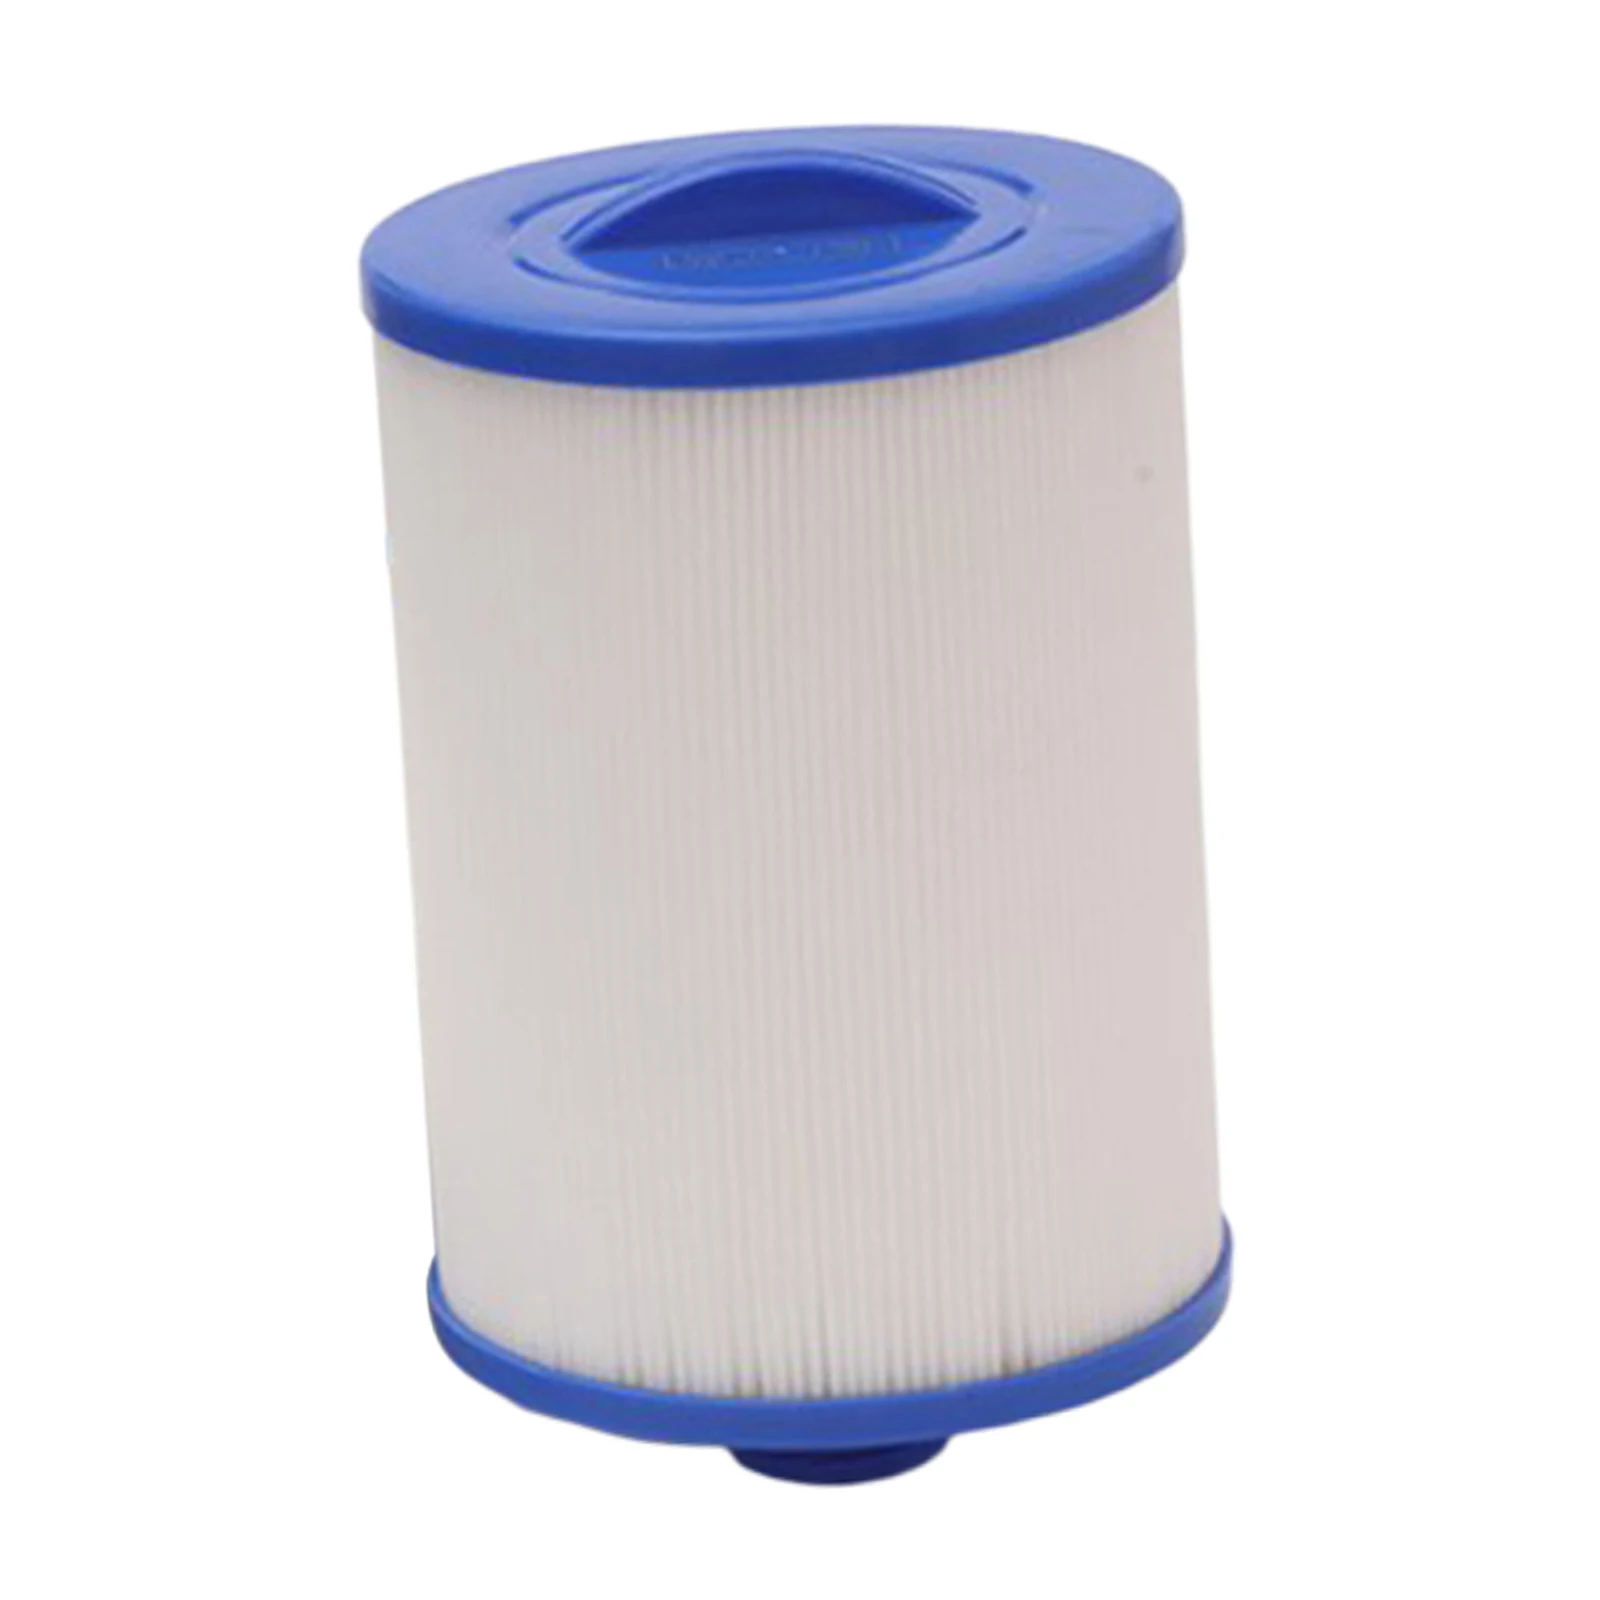 Pool Filter Cartridges Replaces fits for Pleatco PWW50P3 Spare Parts Easy Install